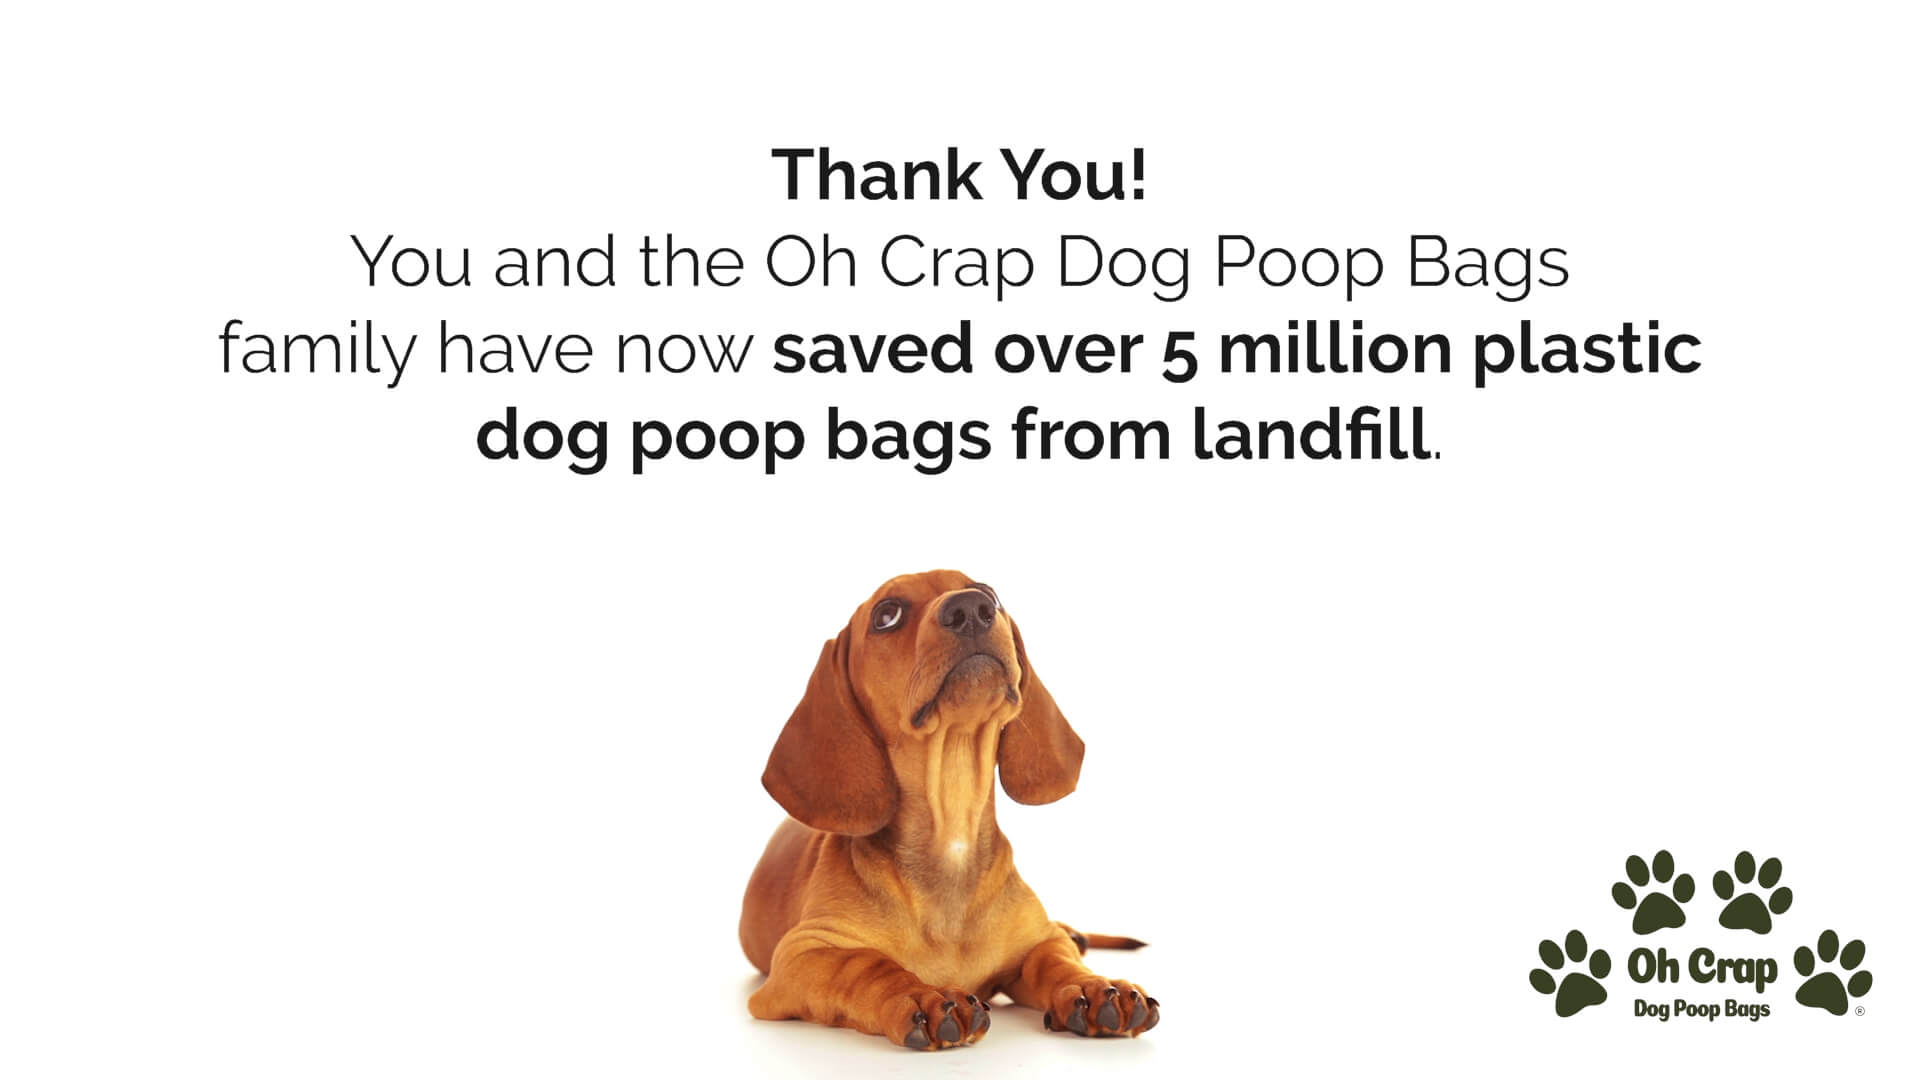 Oh Crap reaches yet another milestone – 5 million bags saved from landfill by eco-conscious company